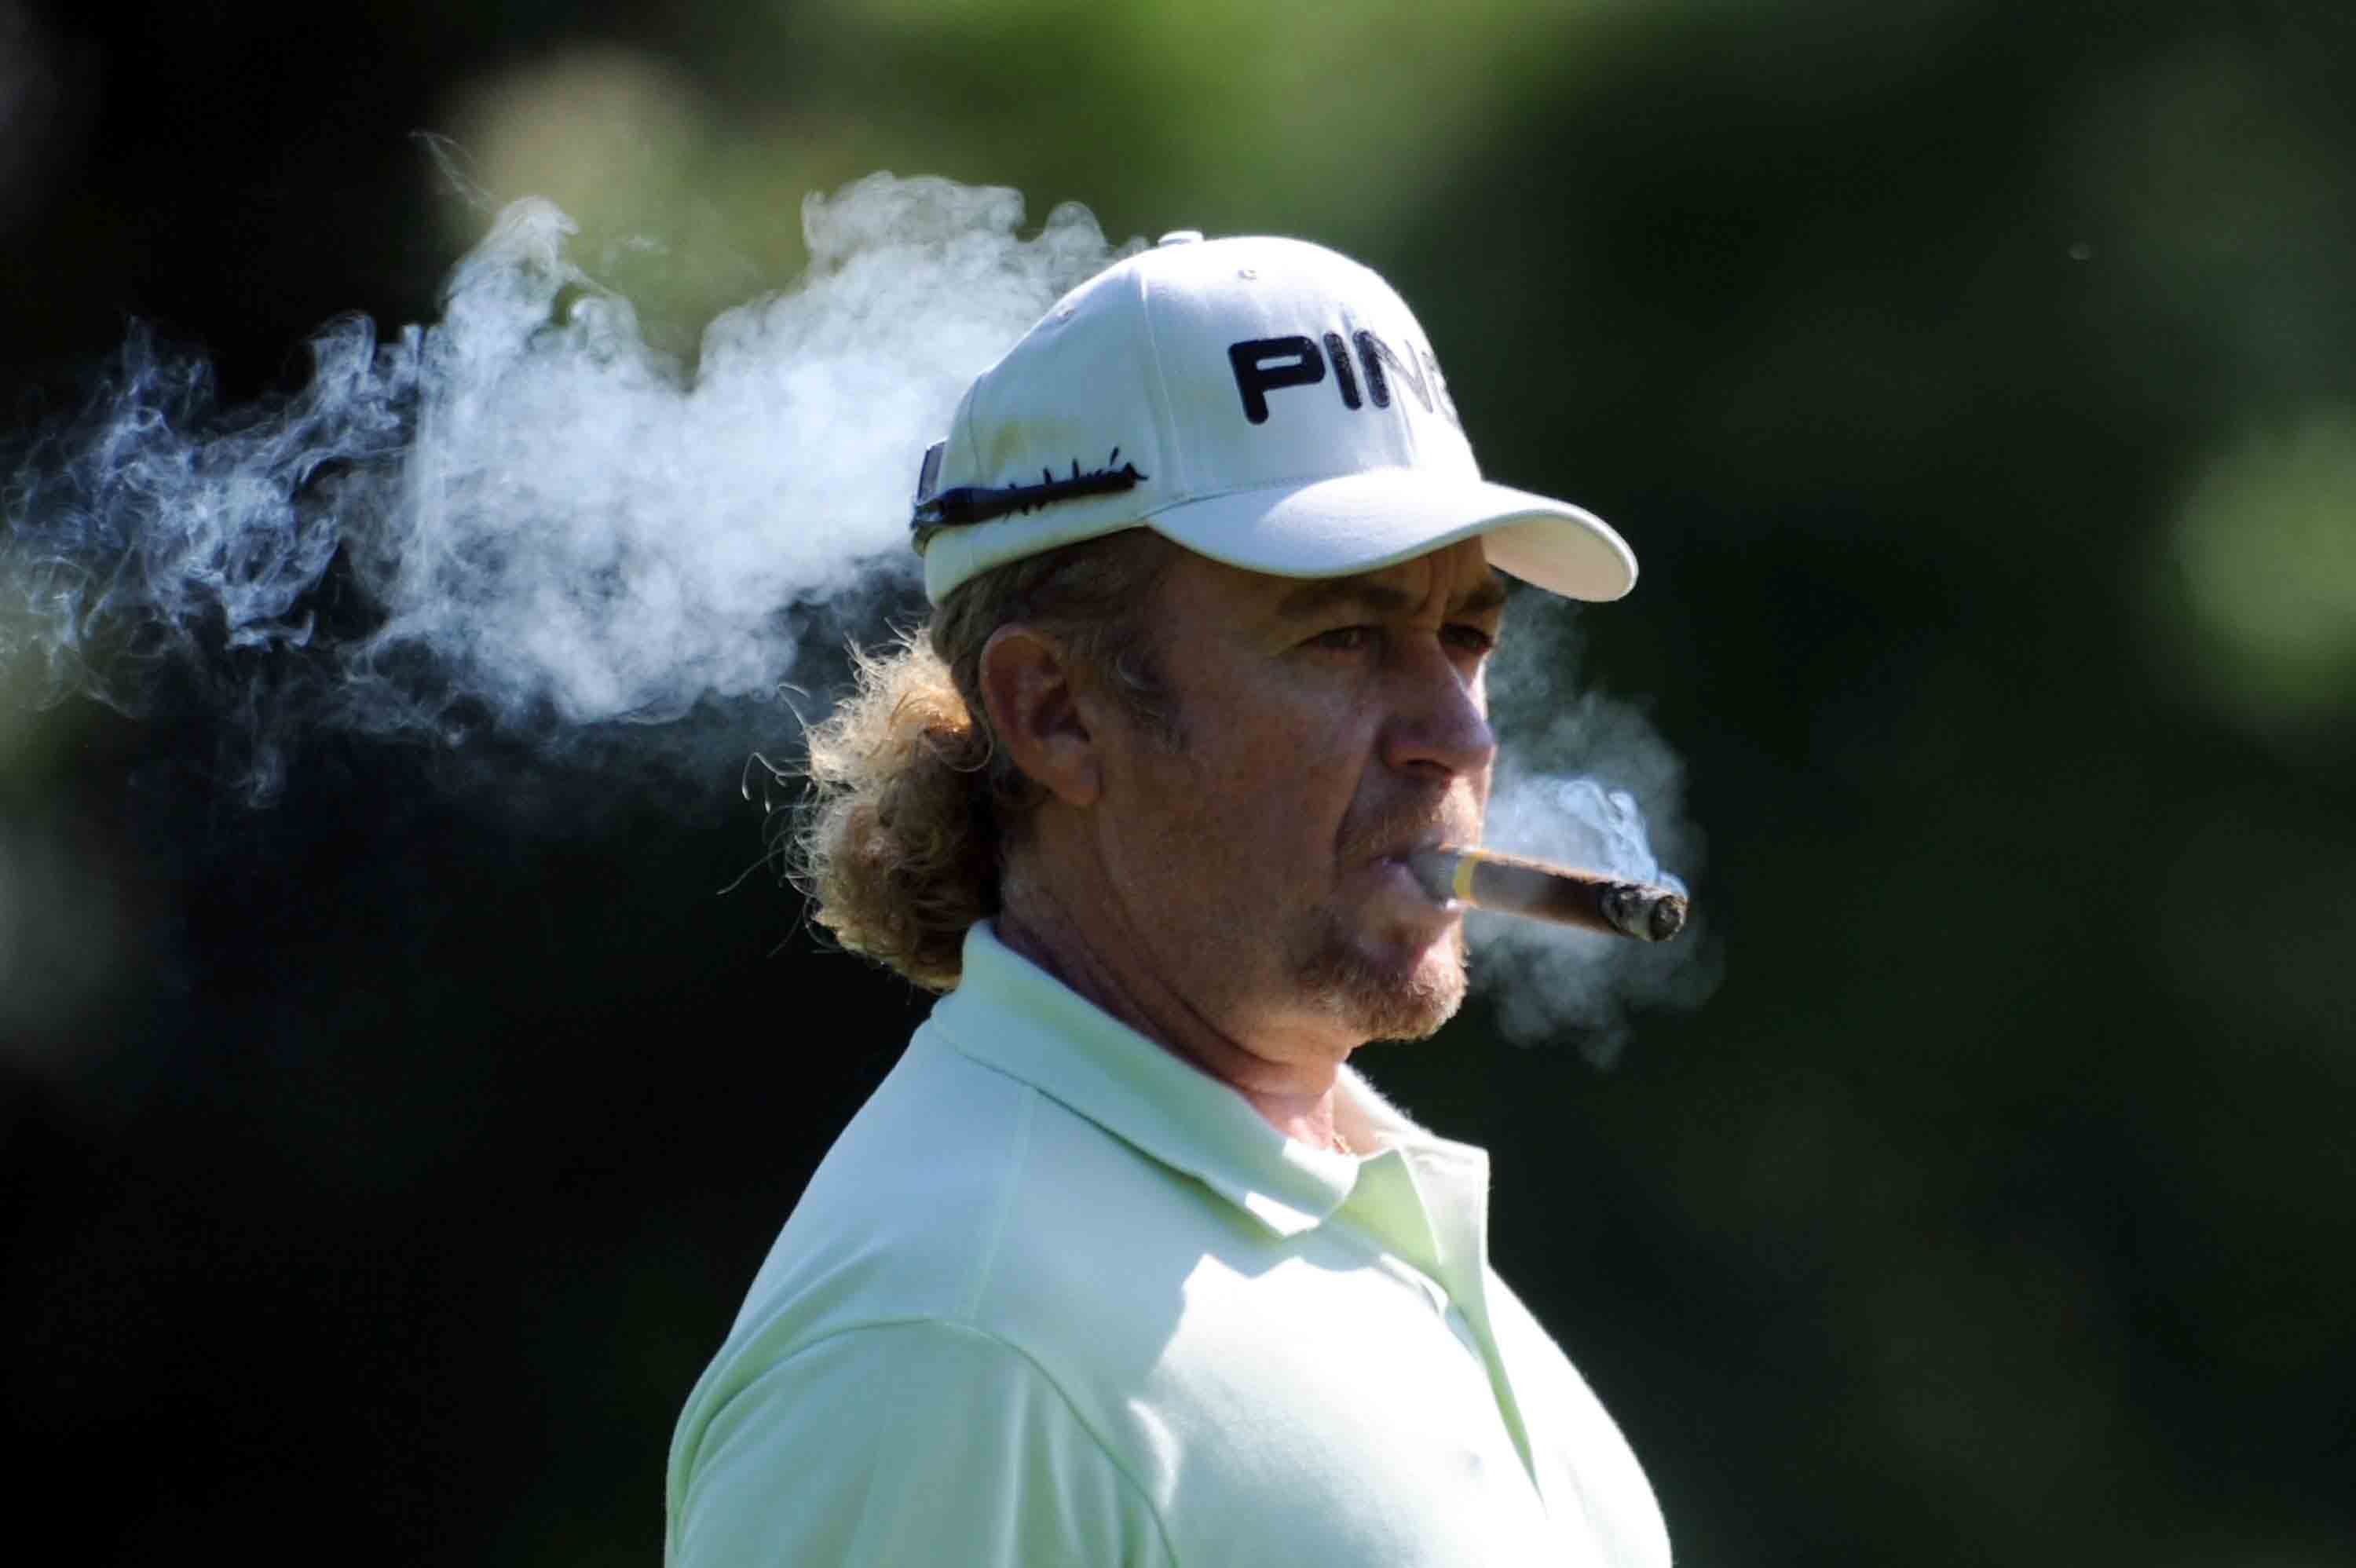 Miguel Angel Jimenez’s Stretching Routine Like You’ve Never Seen It Before